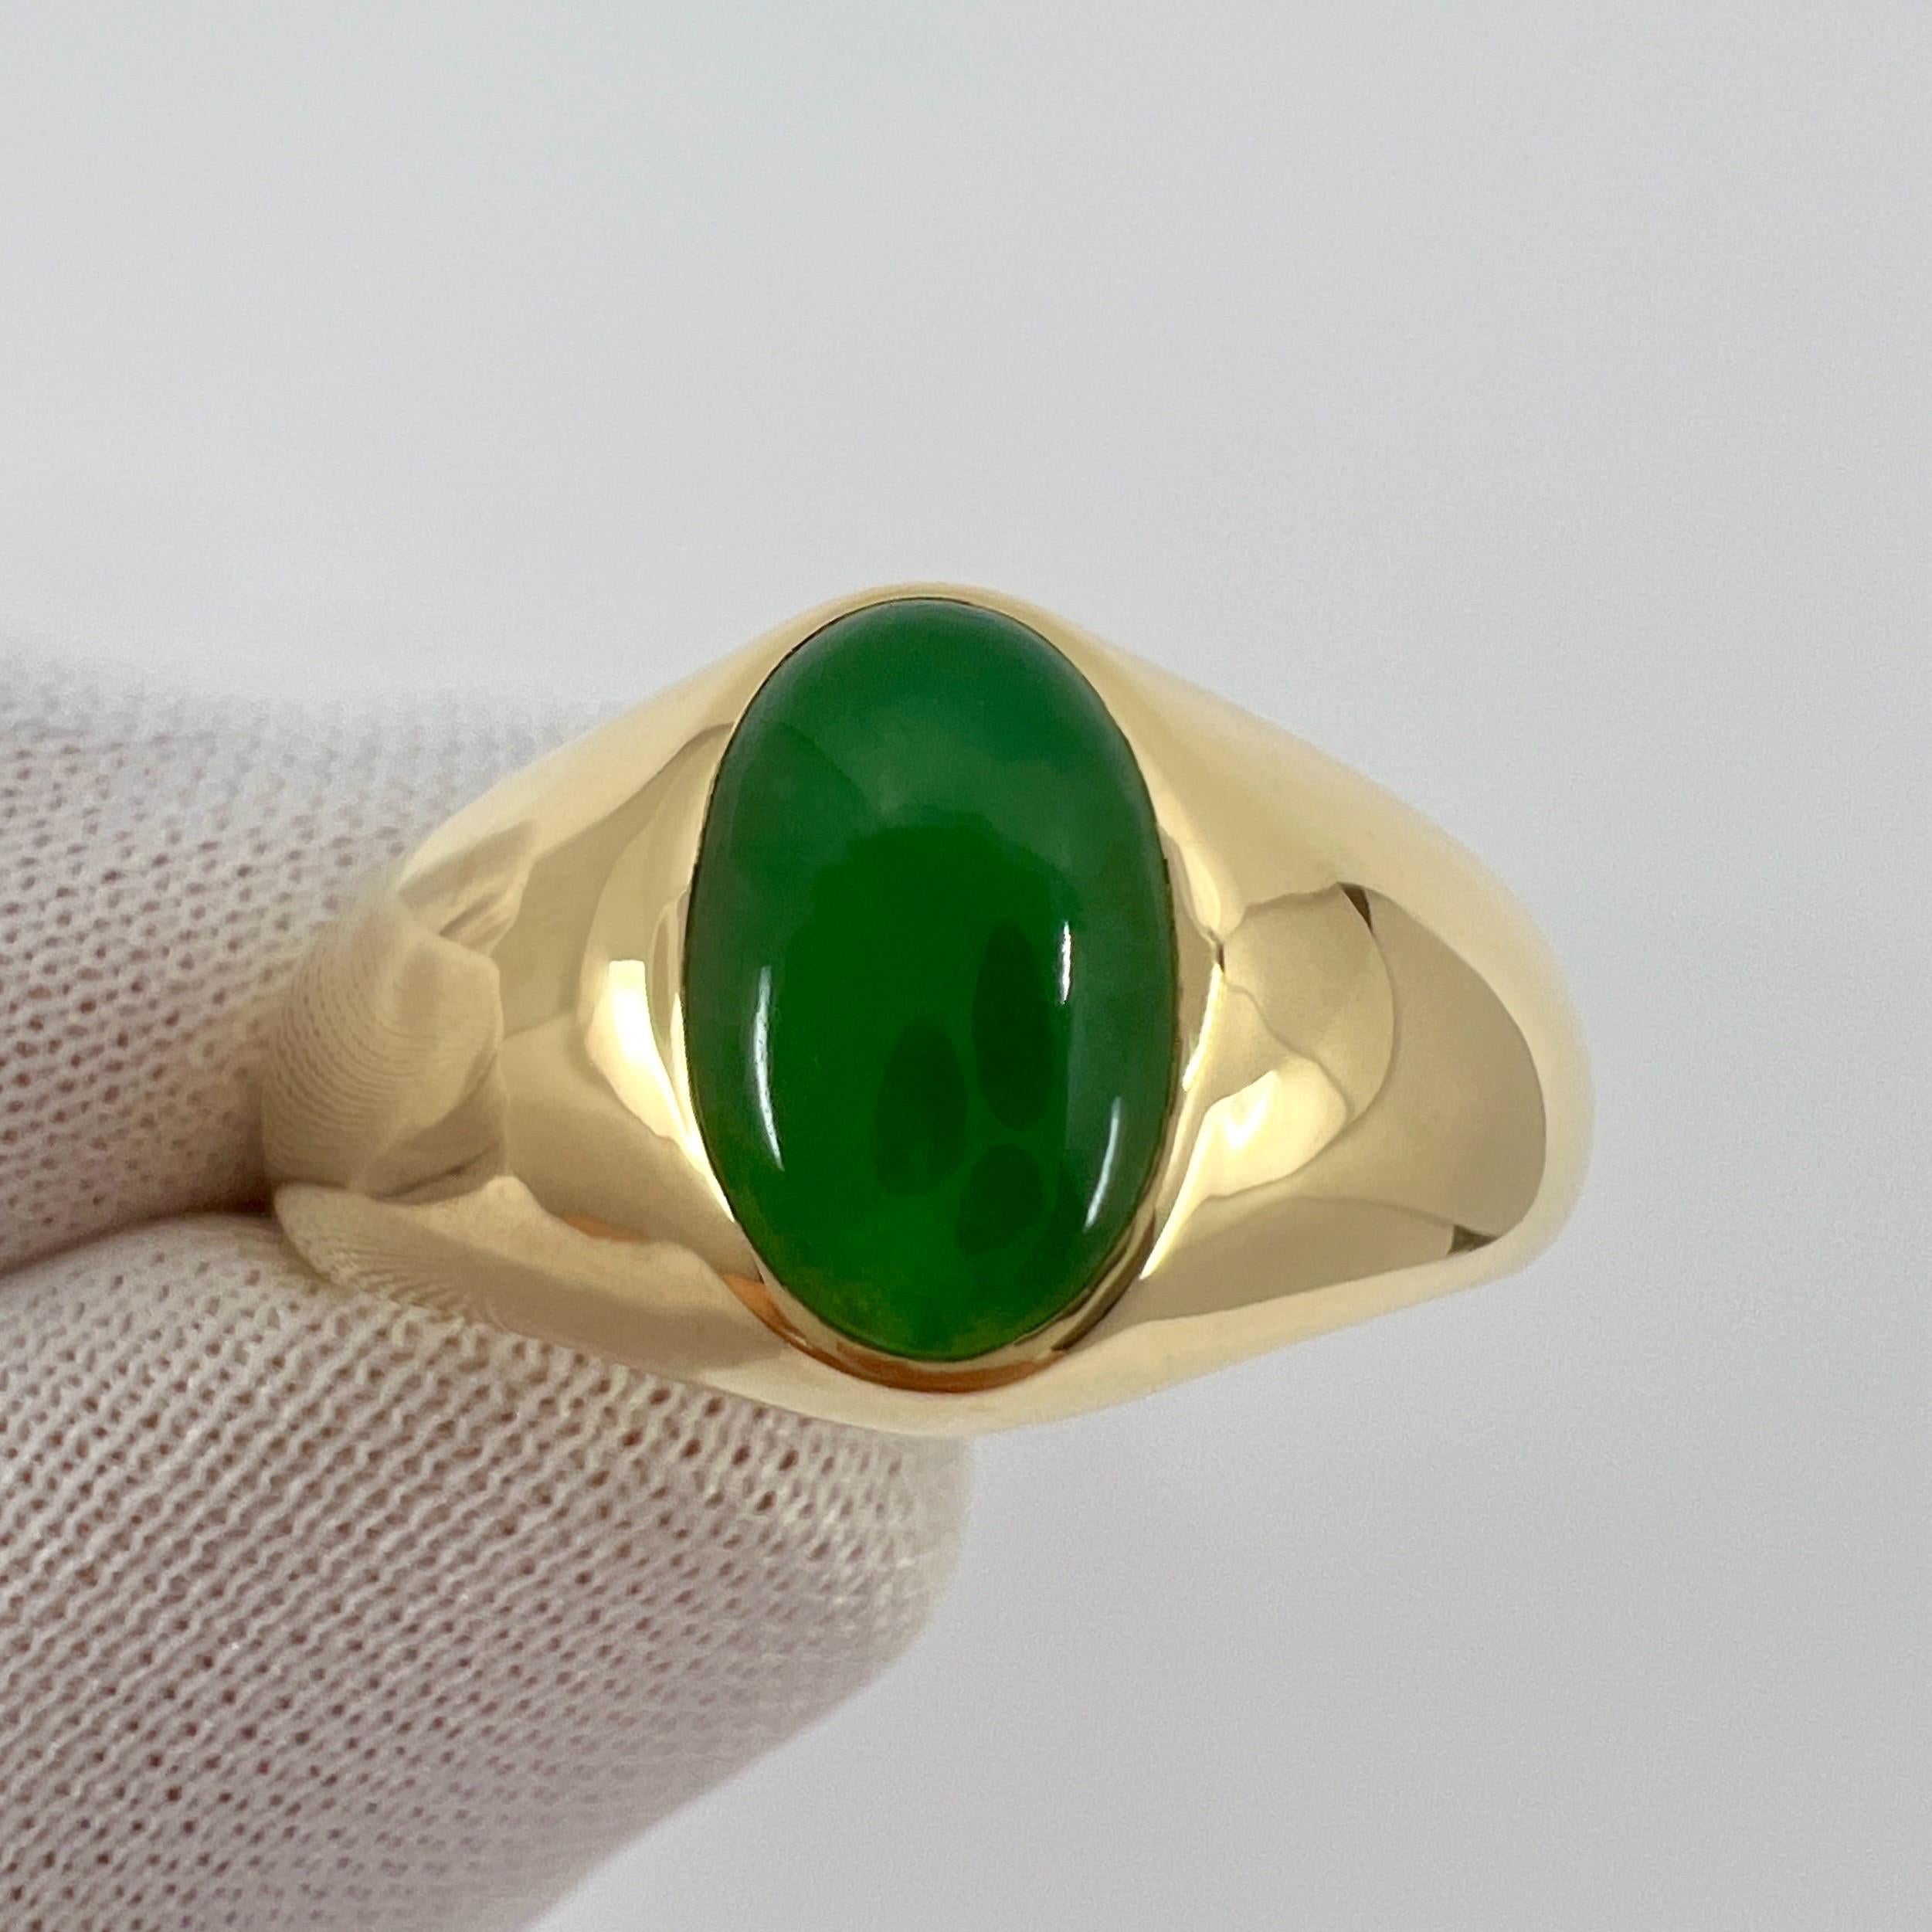 GIA Certified A-Grade Vivid Green Jadeite 18k Yellow Gold Signet Ring.

A stunning 1.43 carat untreated vivid green jadeite jade set in a fine 18k yellow gold rubover bezel signet ring.

This jade has an excellent oval cabochon cut showing the